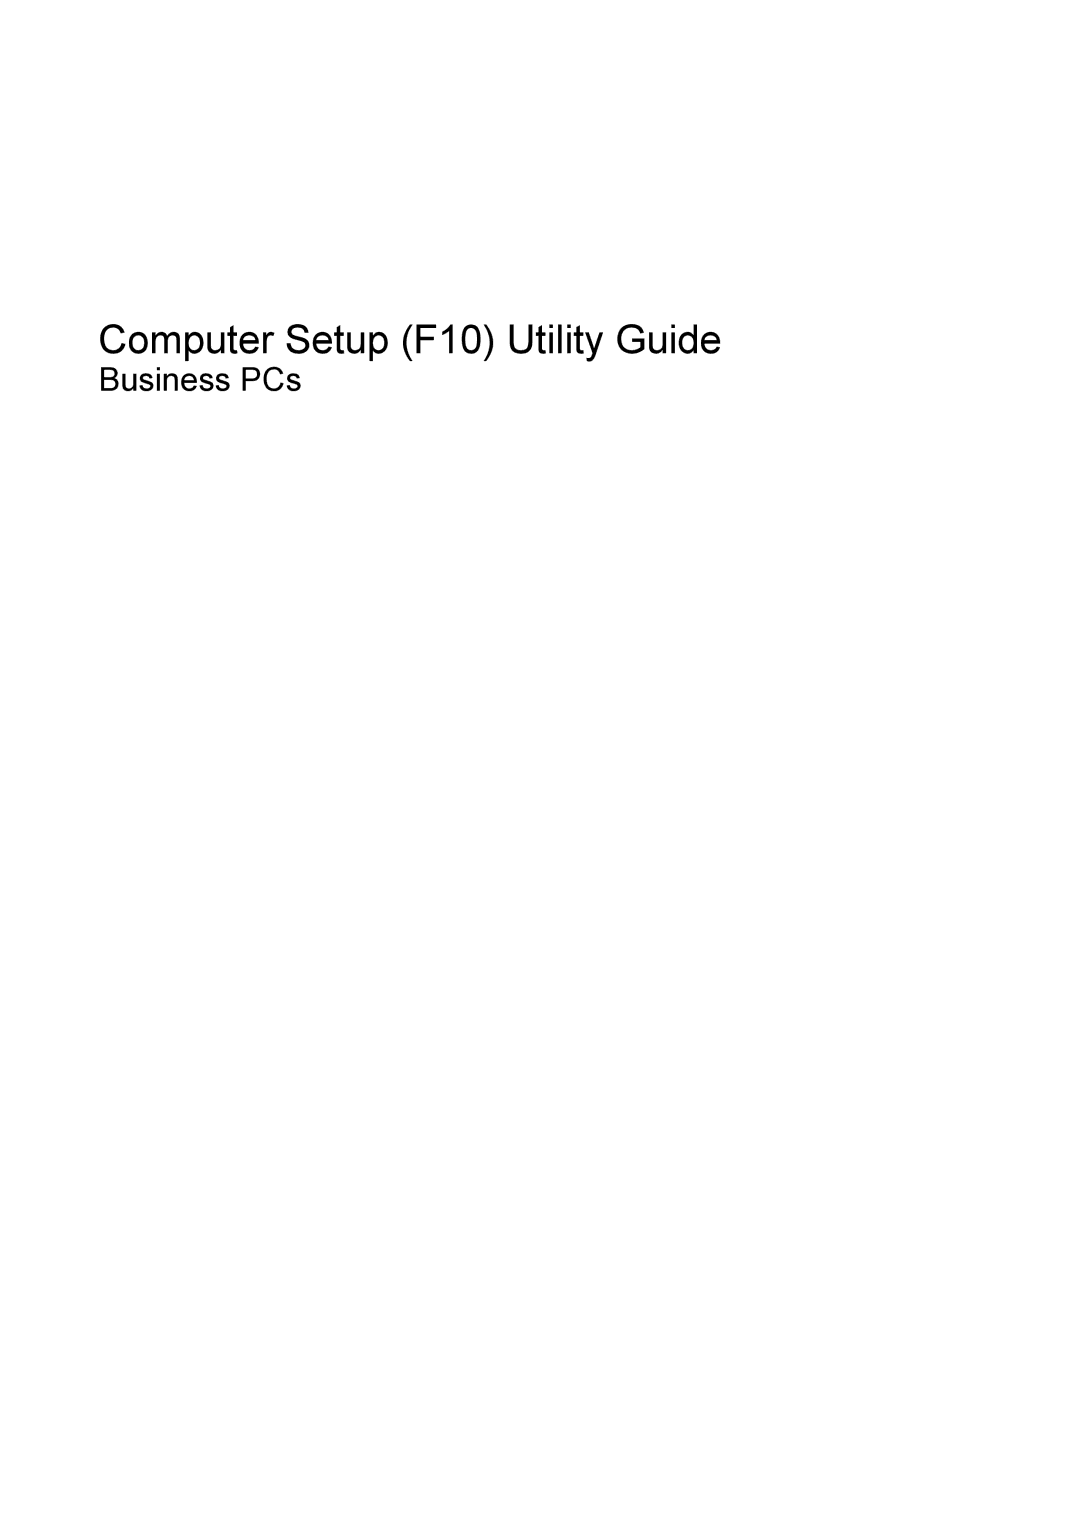 HP dc7800 tower manual Computer Setup F10 Utility Guide 